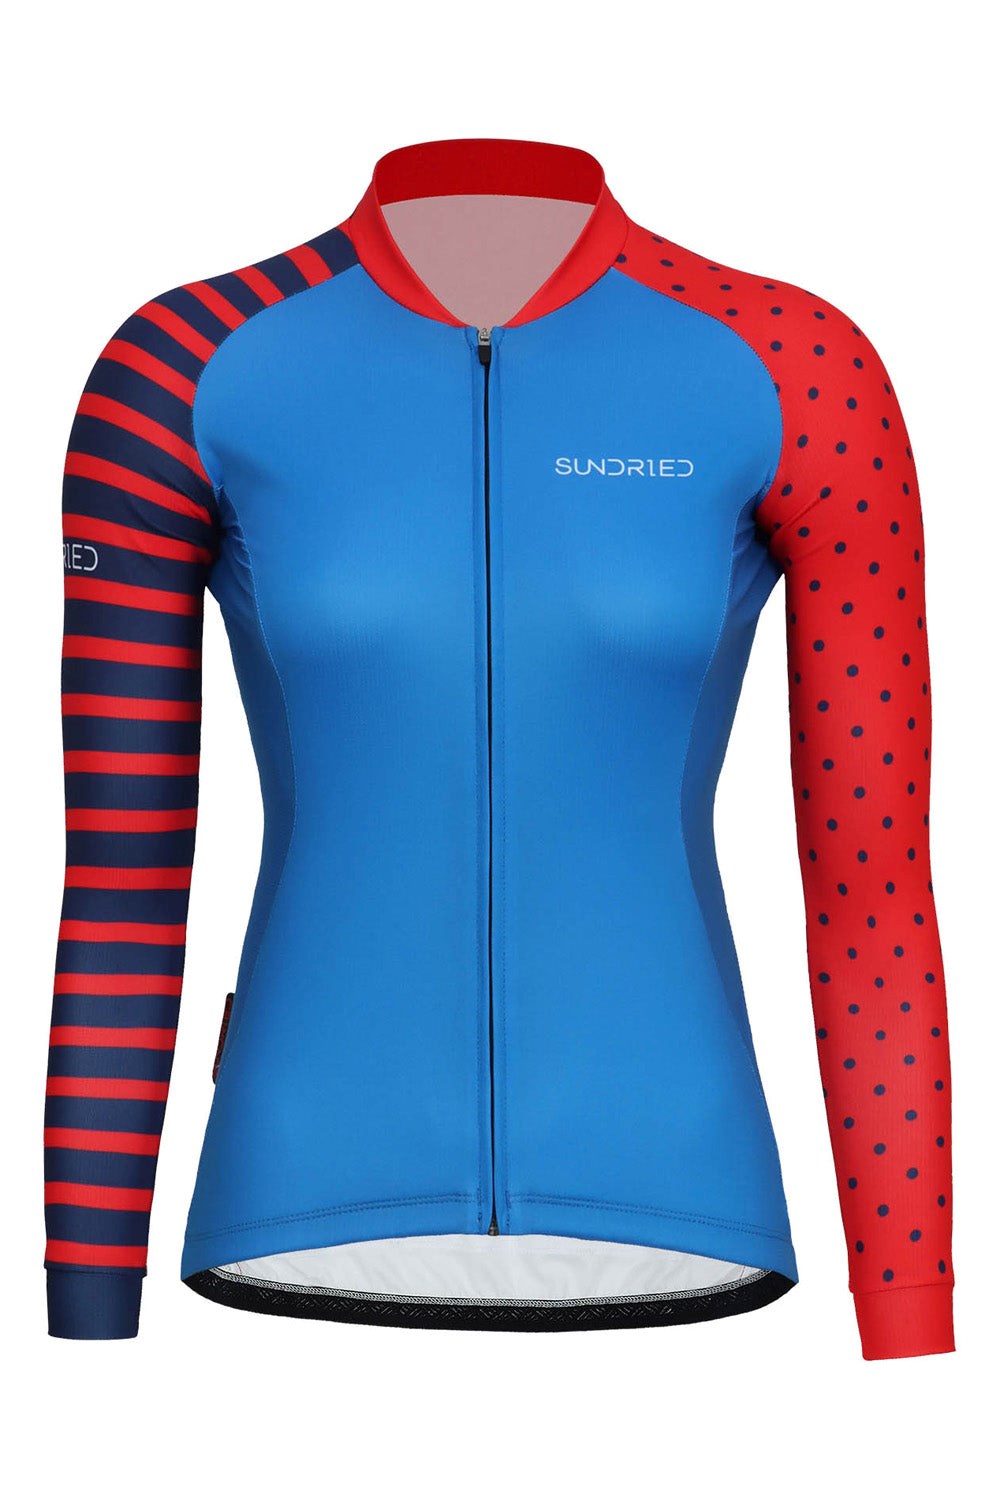 Spots & Stripes Womens Long Sleeve Cycle Jersey -